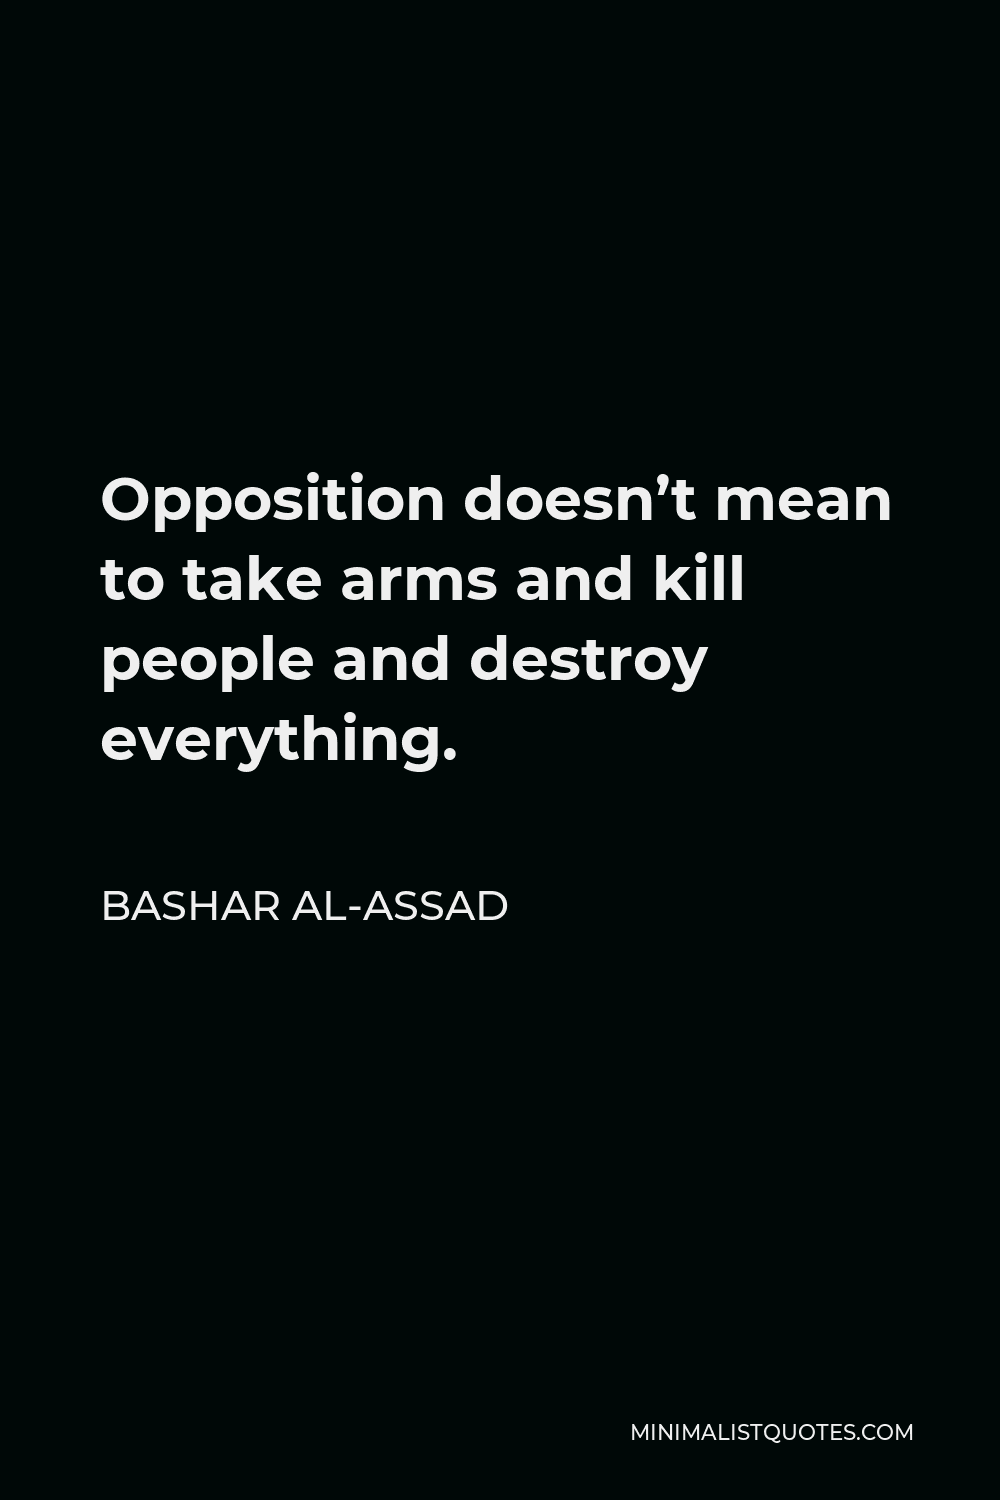 Bashar al-Assad Quote - Opposition doesn’t mean to take arms and kill people and destroy everything.